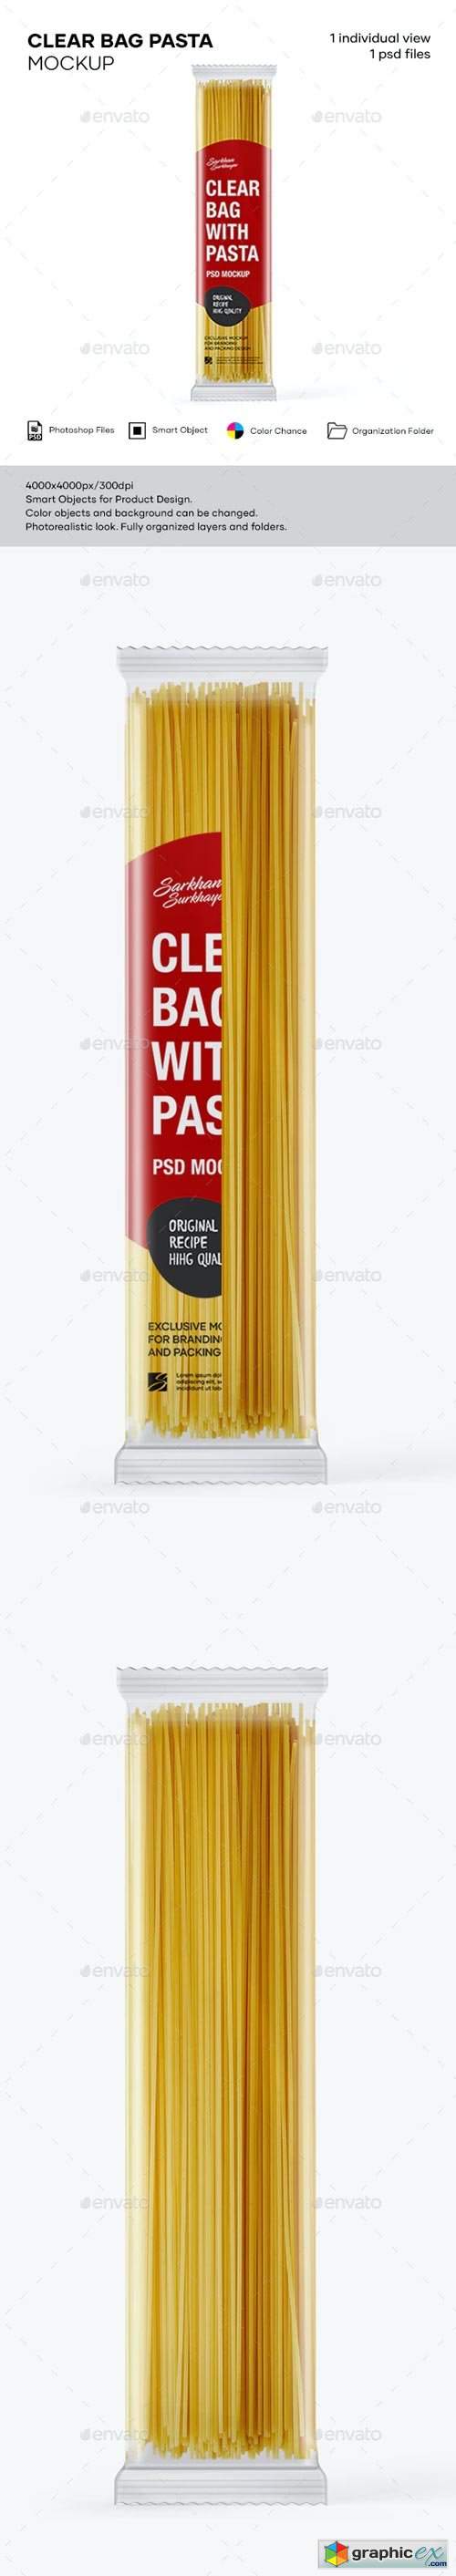 Clear Bag With Pasta Mockup 29509333